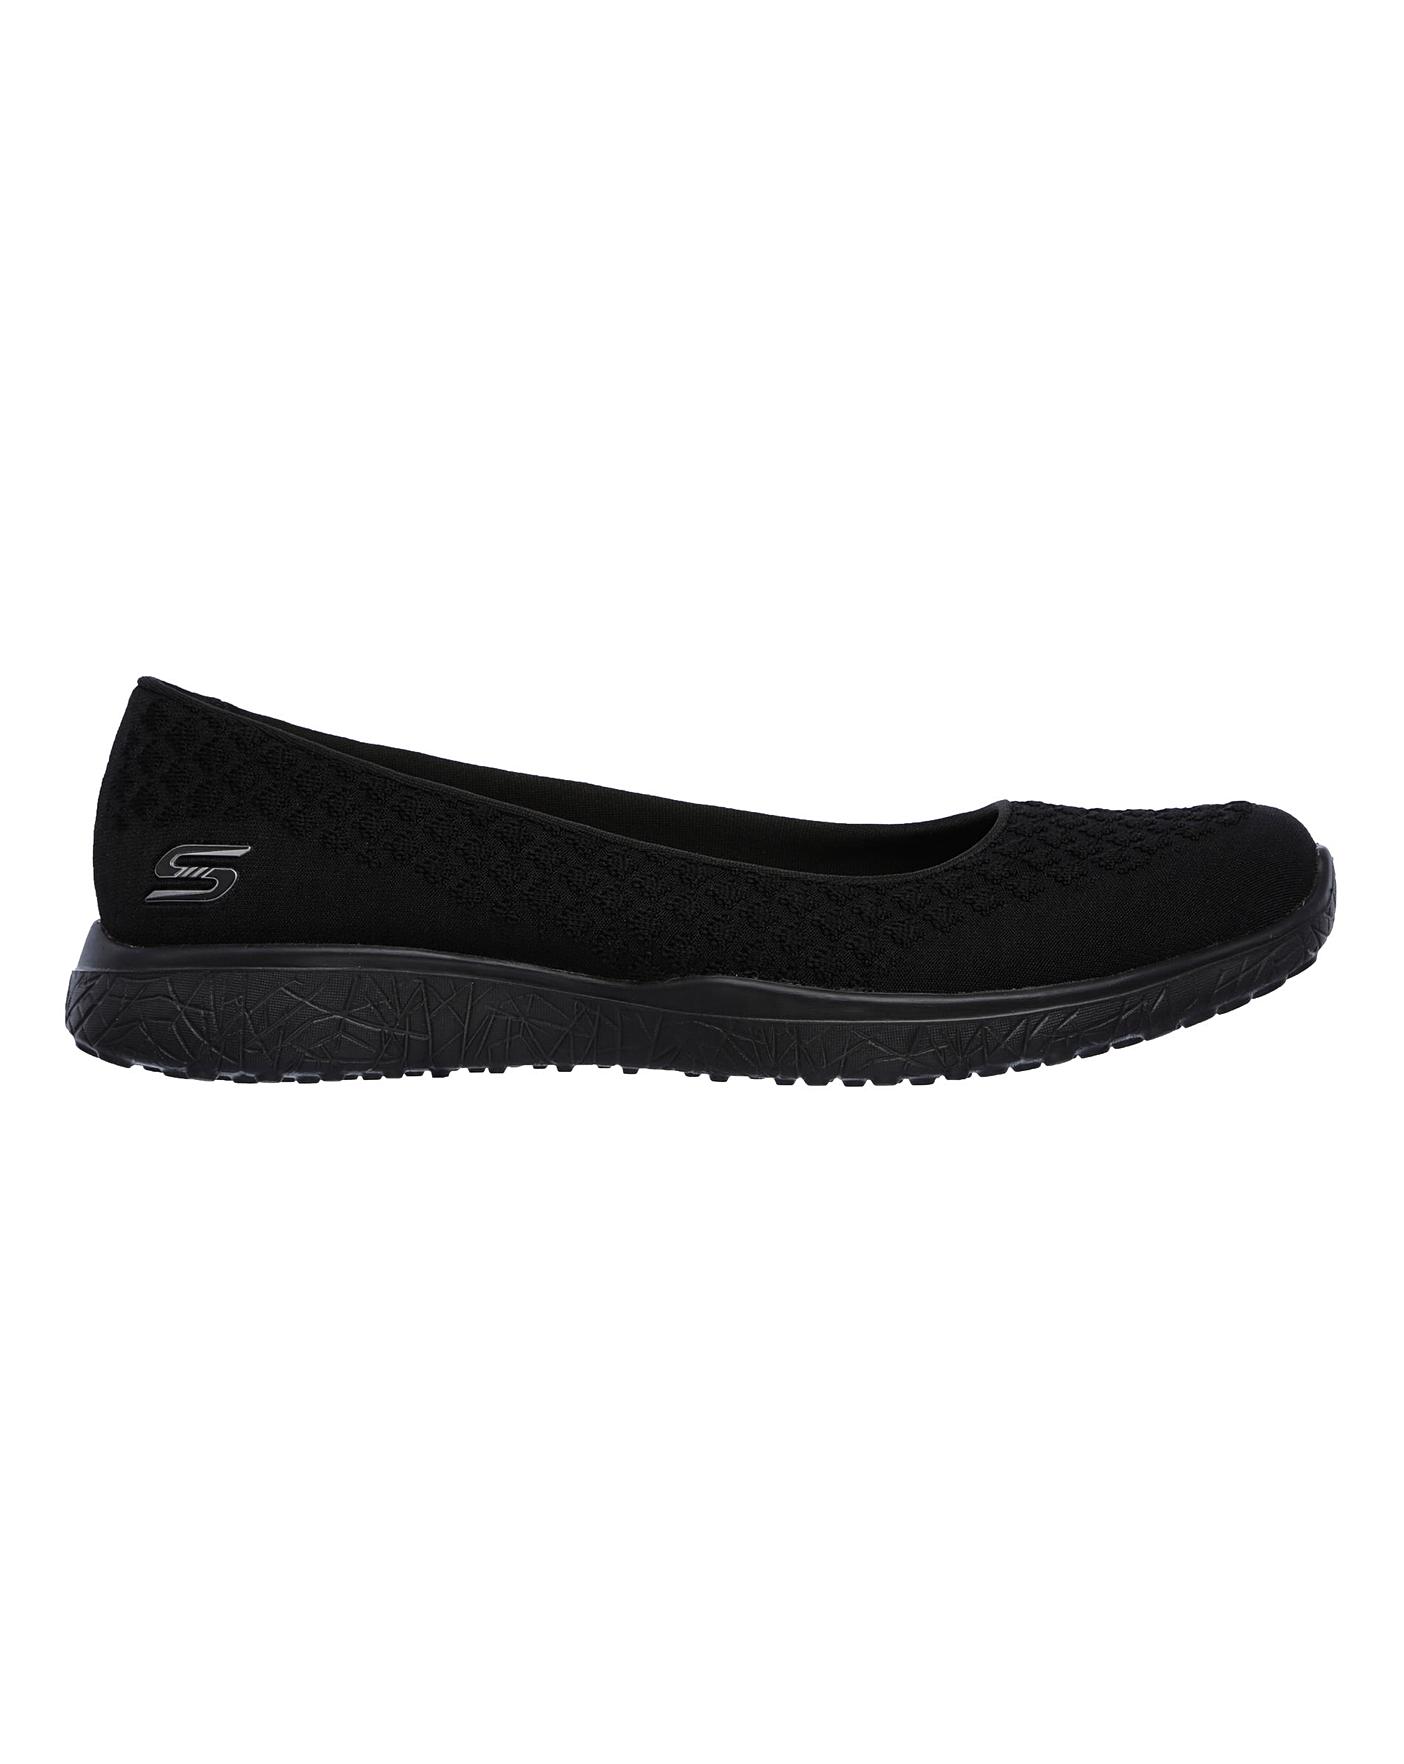 Skechers Microburst Trainers Wide Fit 